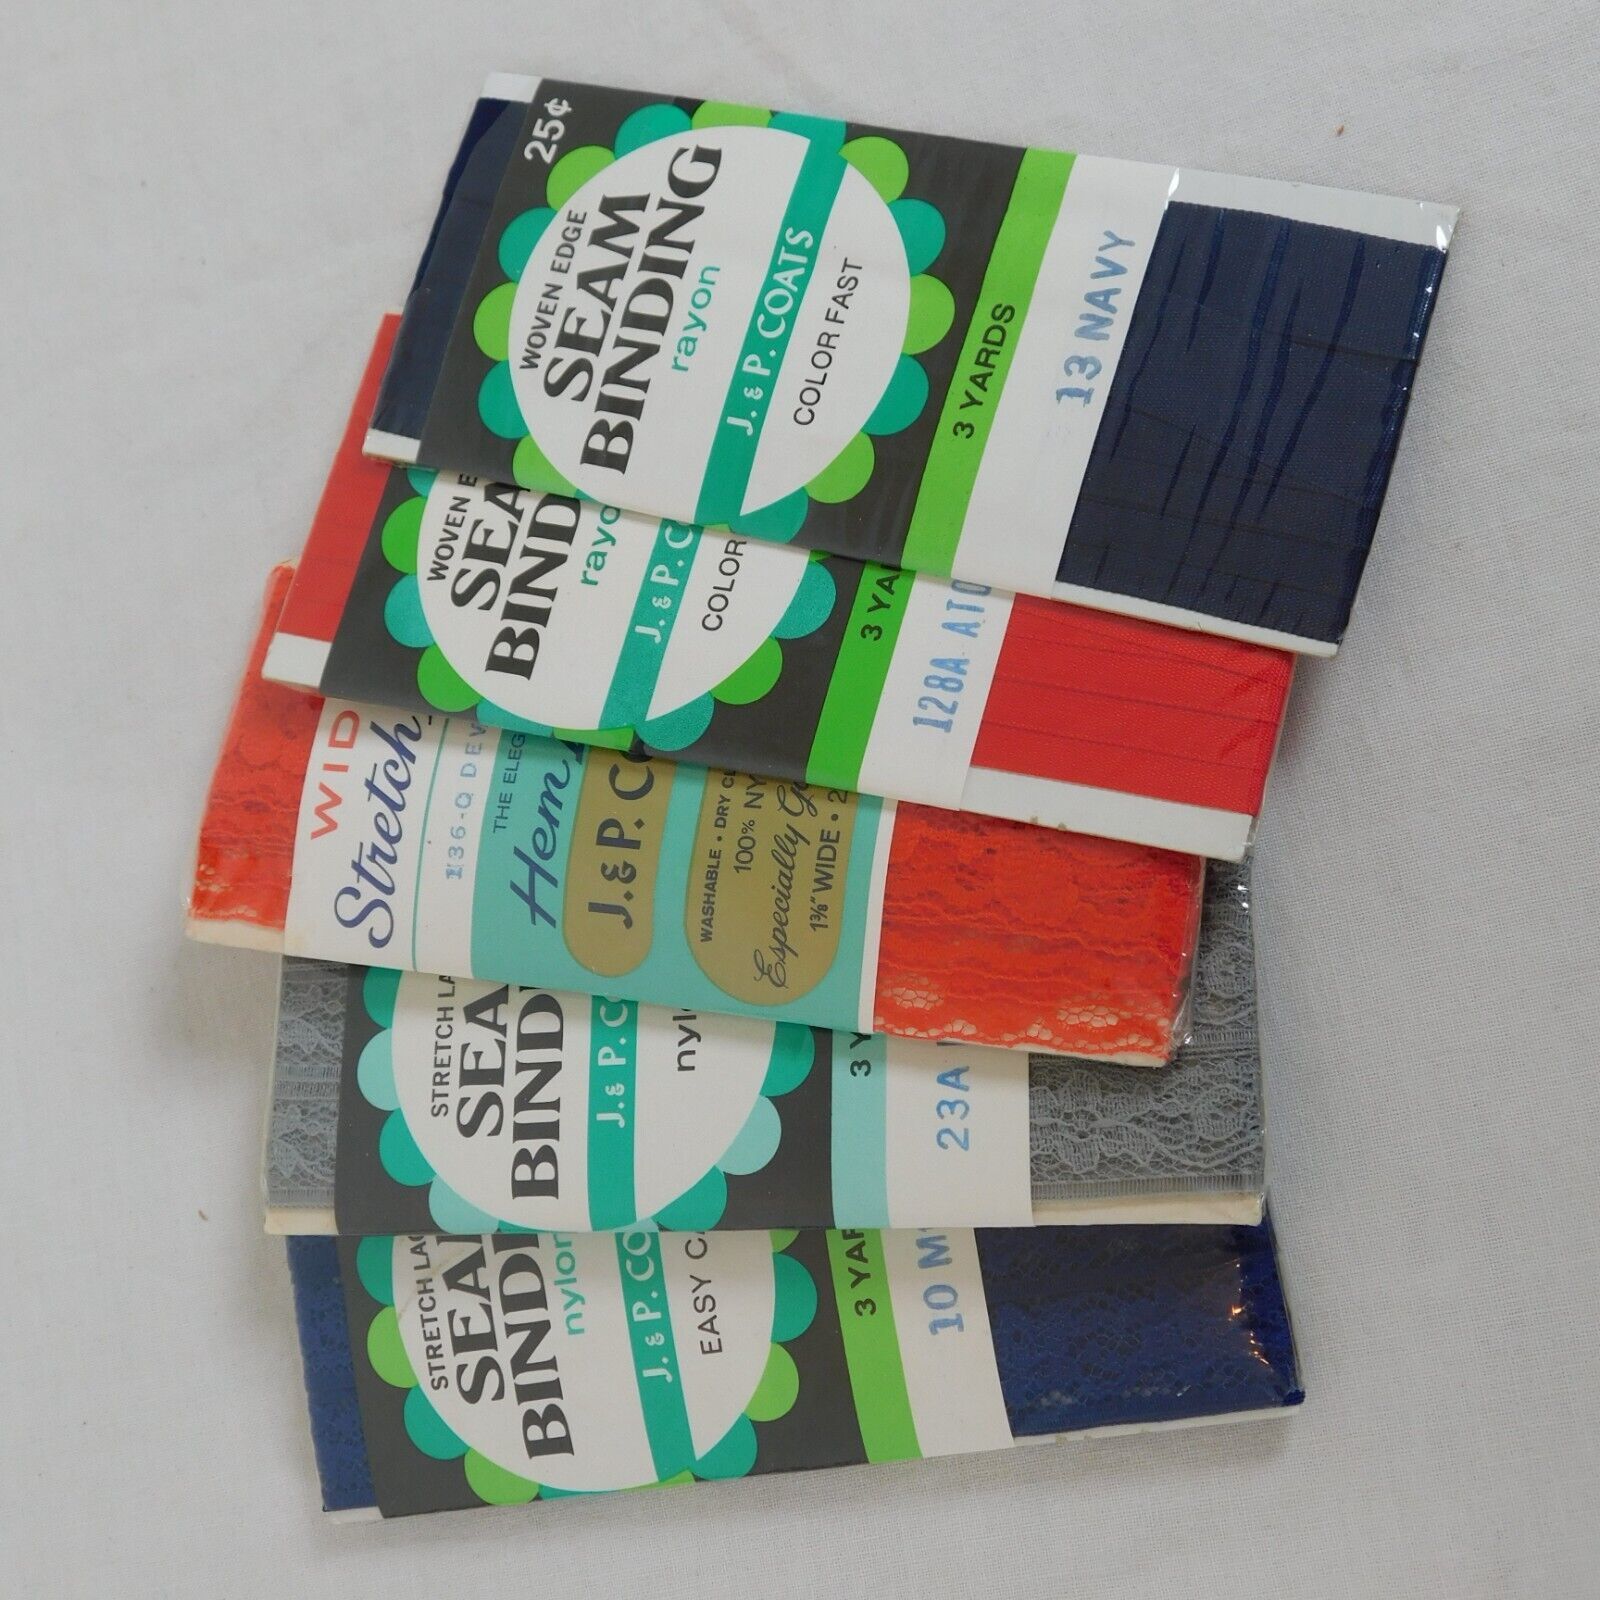 Seam Binding Tape Lot of 5 New Unopened Lace Woven J&P Coats Blue Red Gray Mix - $14.52